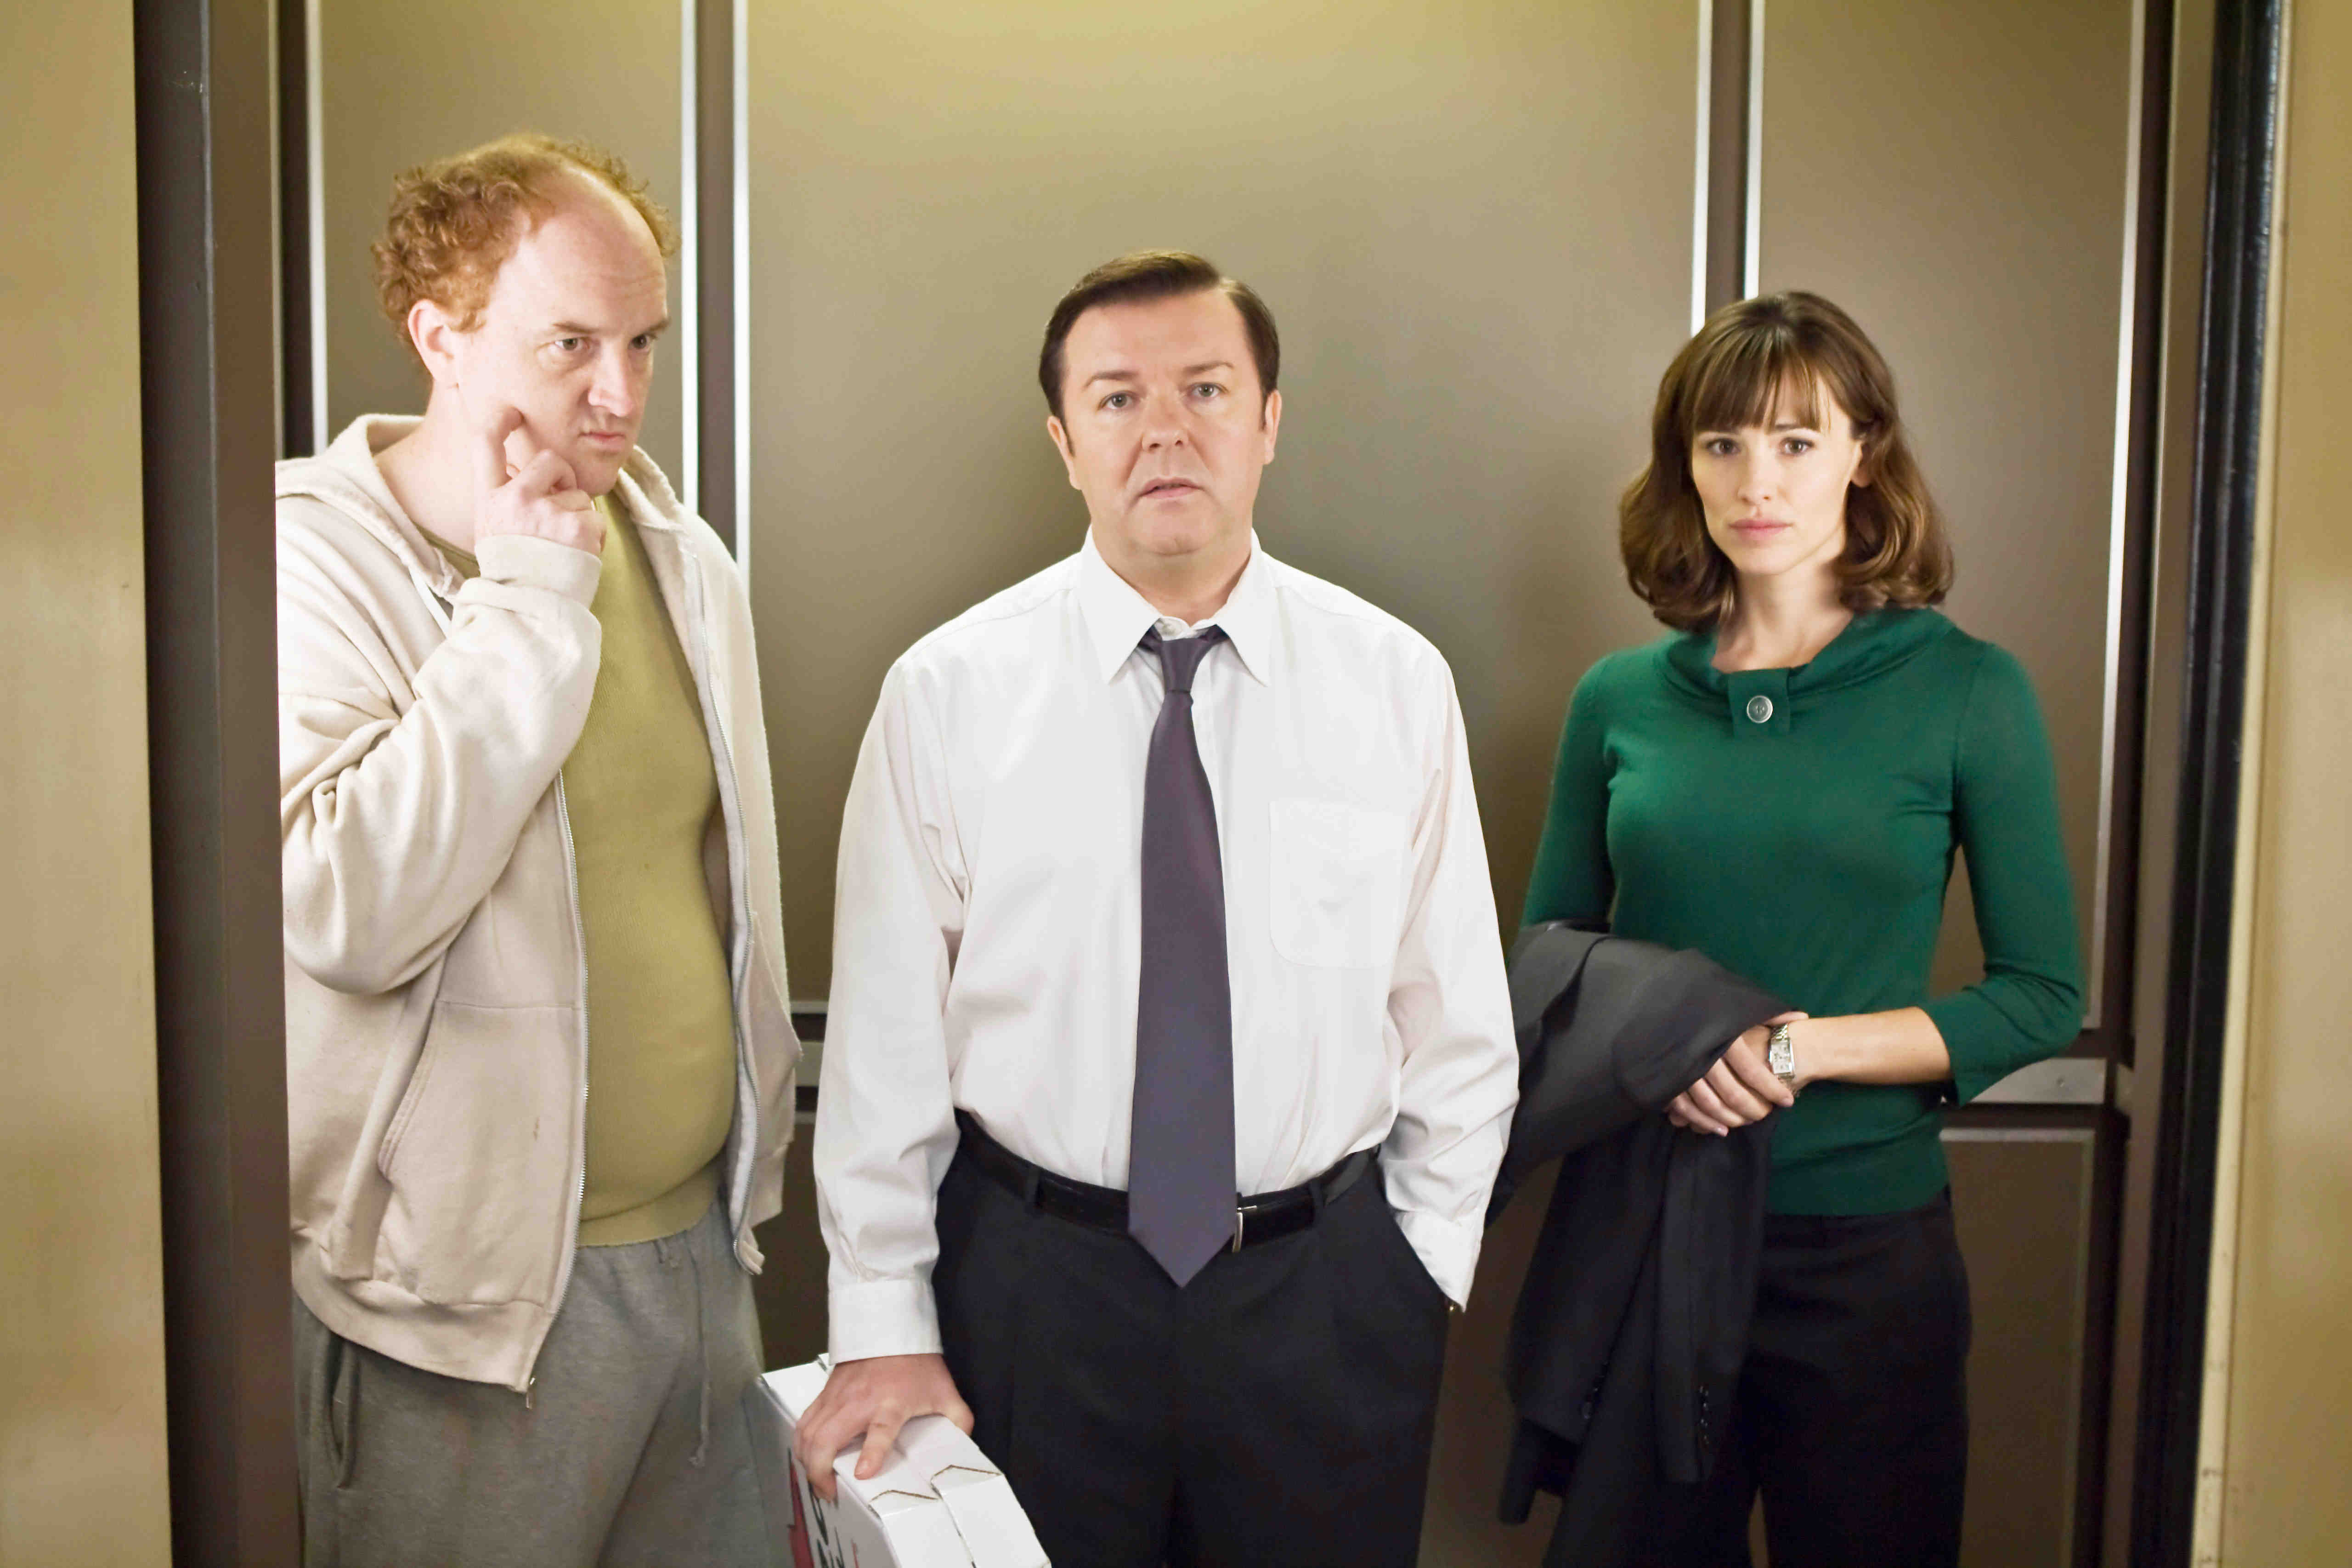 Louis C.K., Ricky Gervais and Jennifer Garner in Warner Bros. Pictures' The Invention of Lying (2009)